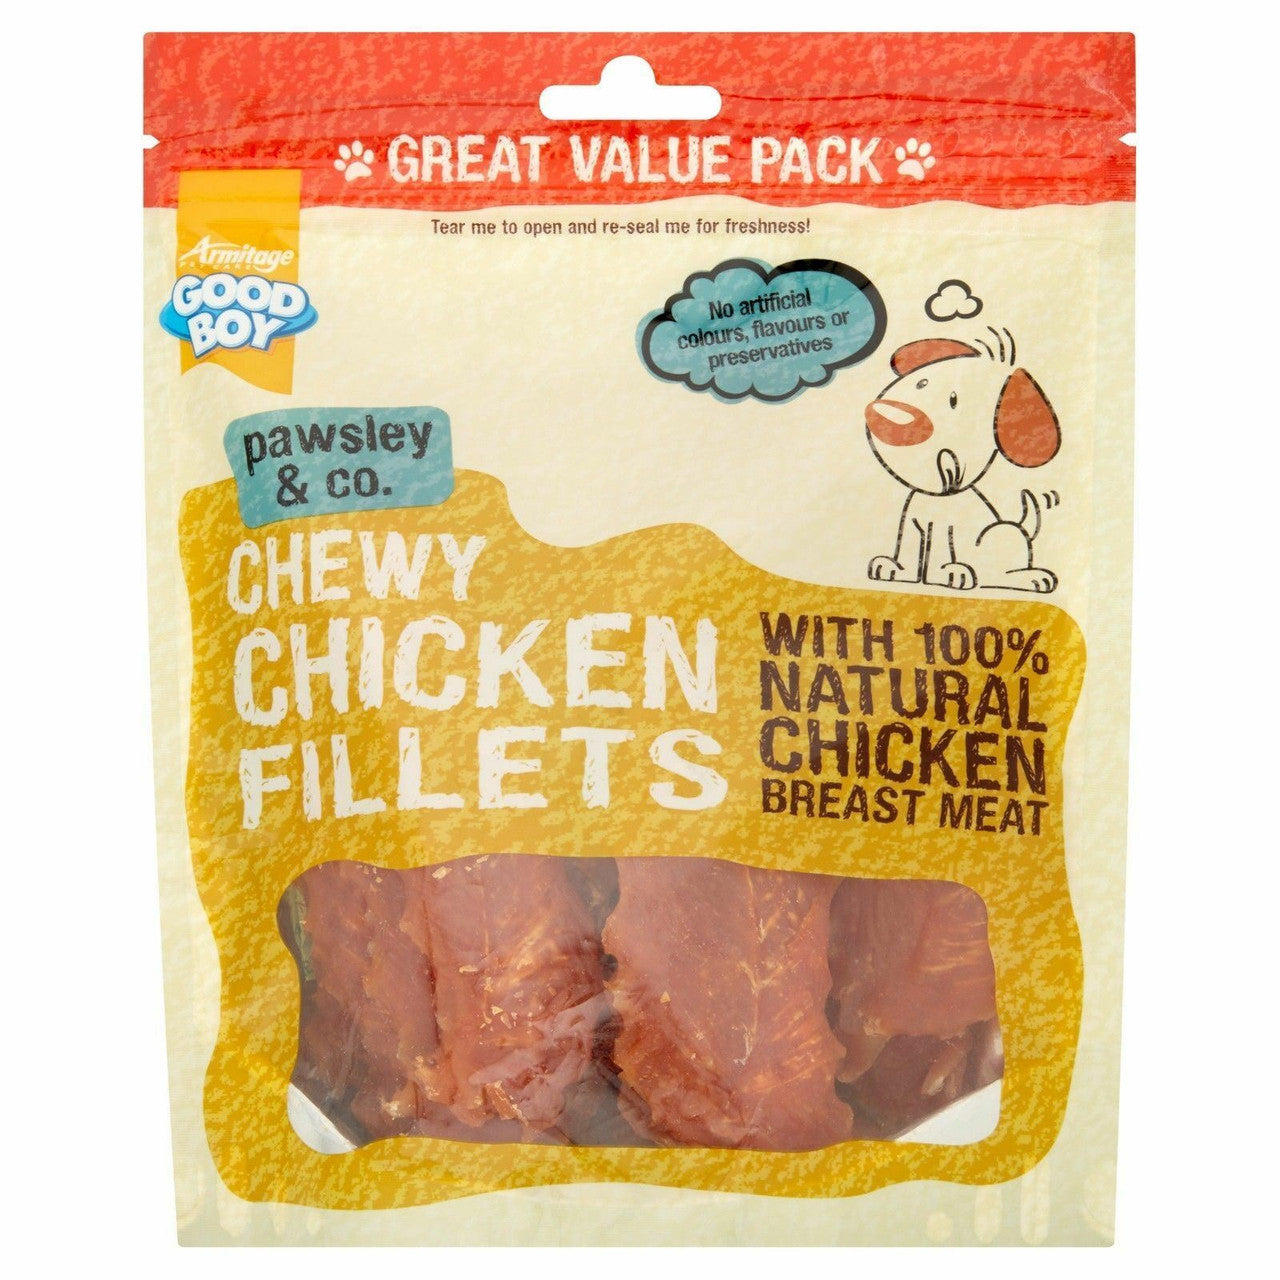 Good Boy 320g Chewy Chicken Fillets Value Pack